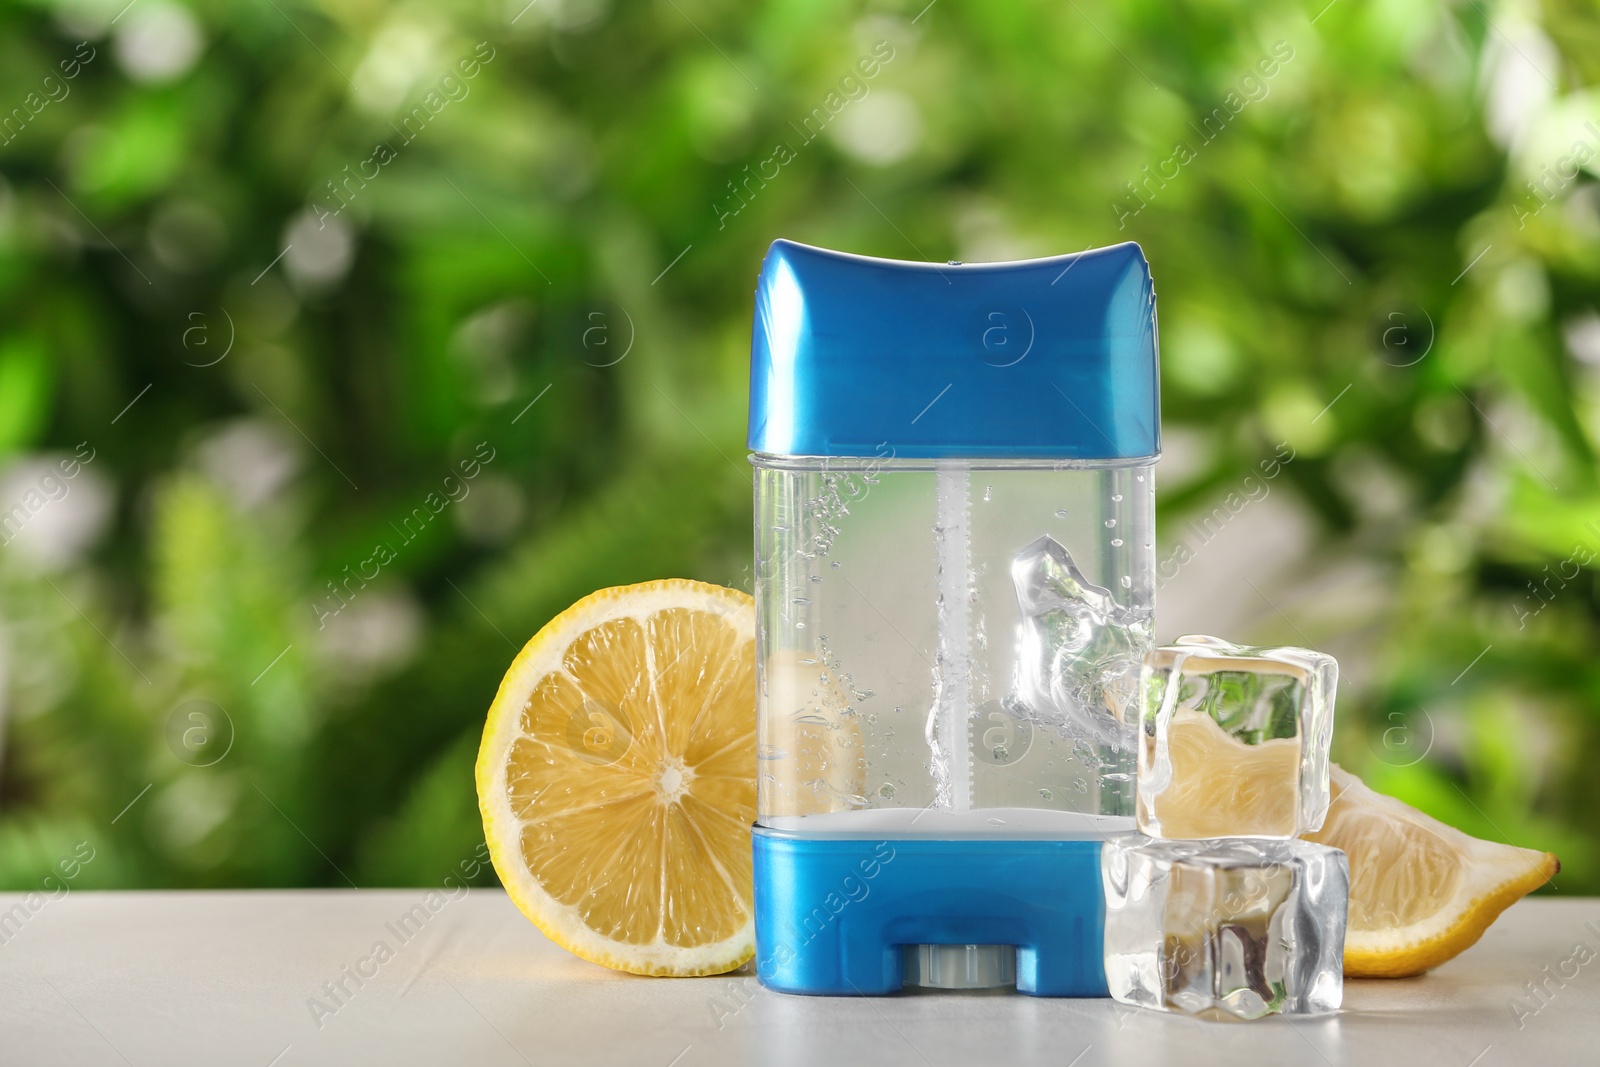 Photo of Deodorant container, ice cubes and citrus on white wooden table against blurred background